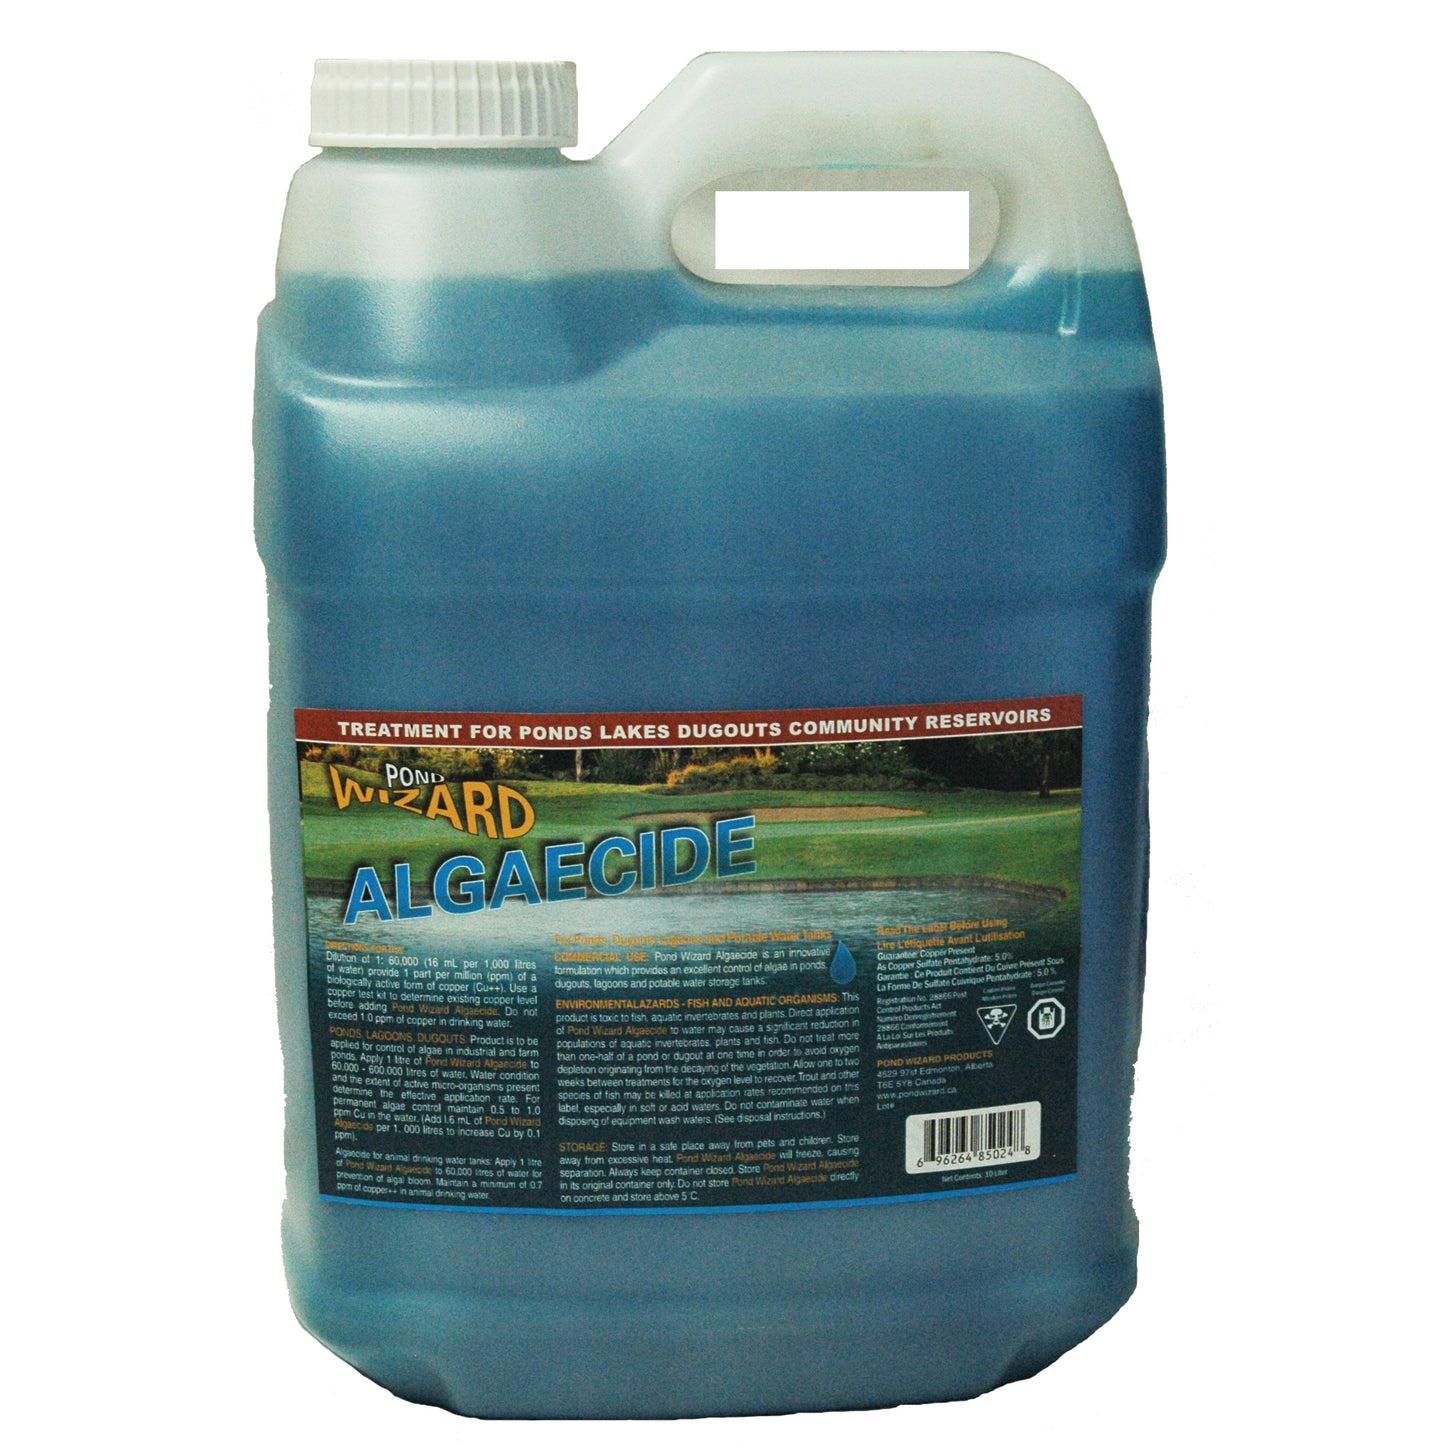 Pond Wizard Algaecide - IN STOCK, CALL TO ORDER